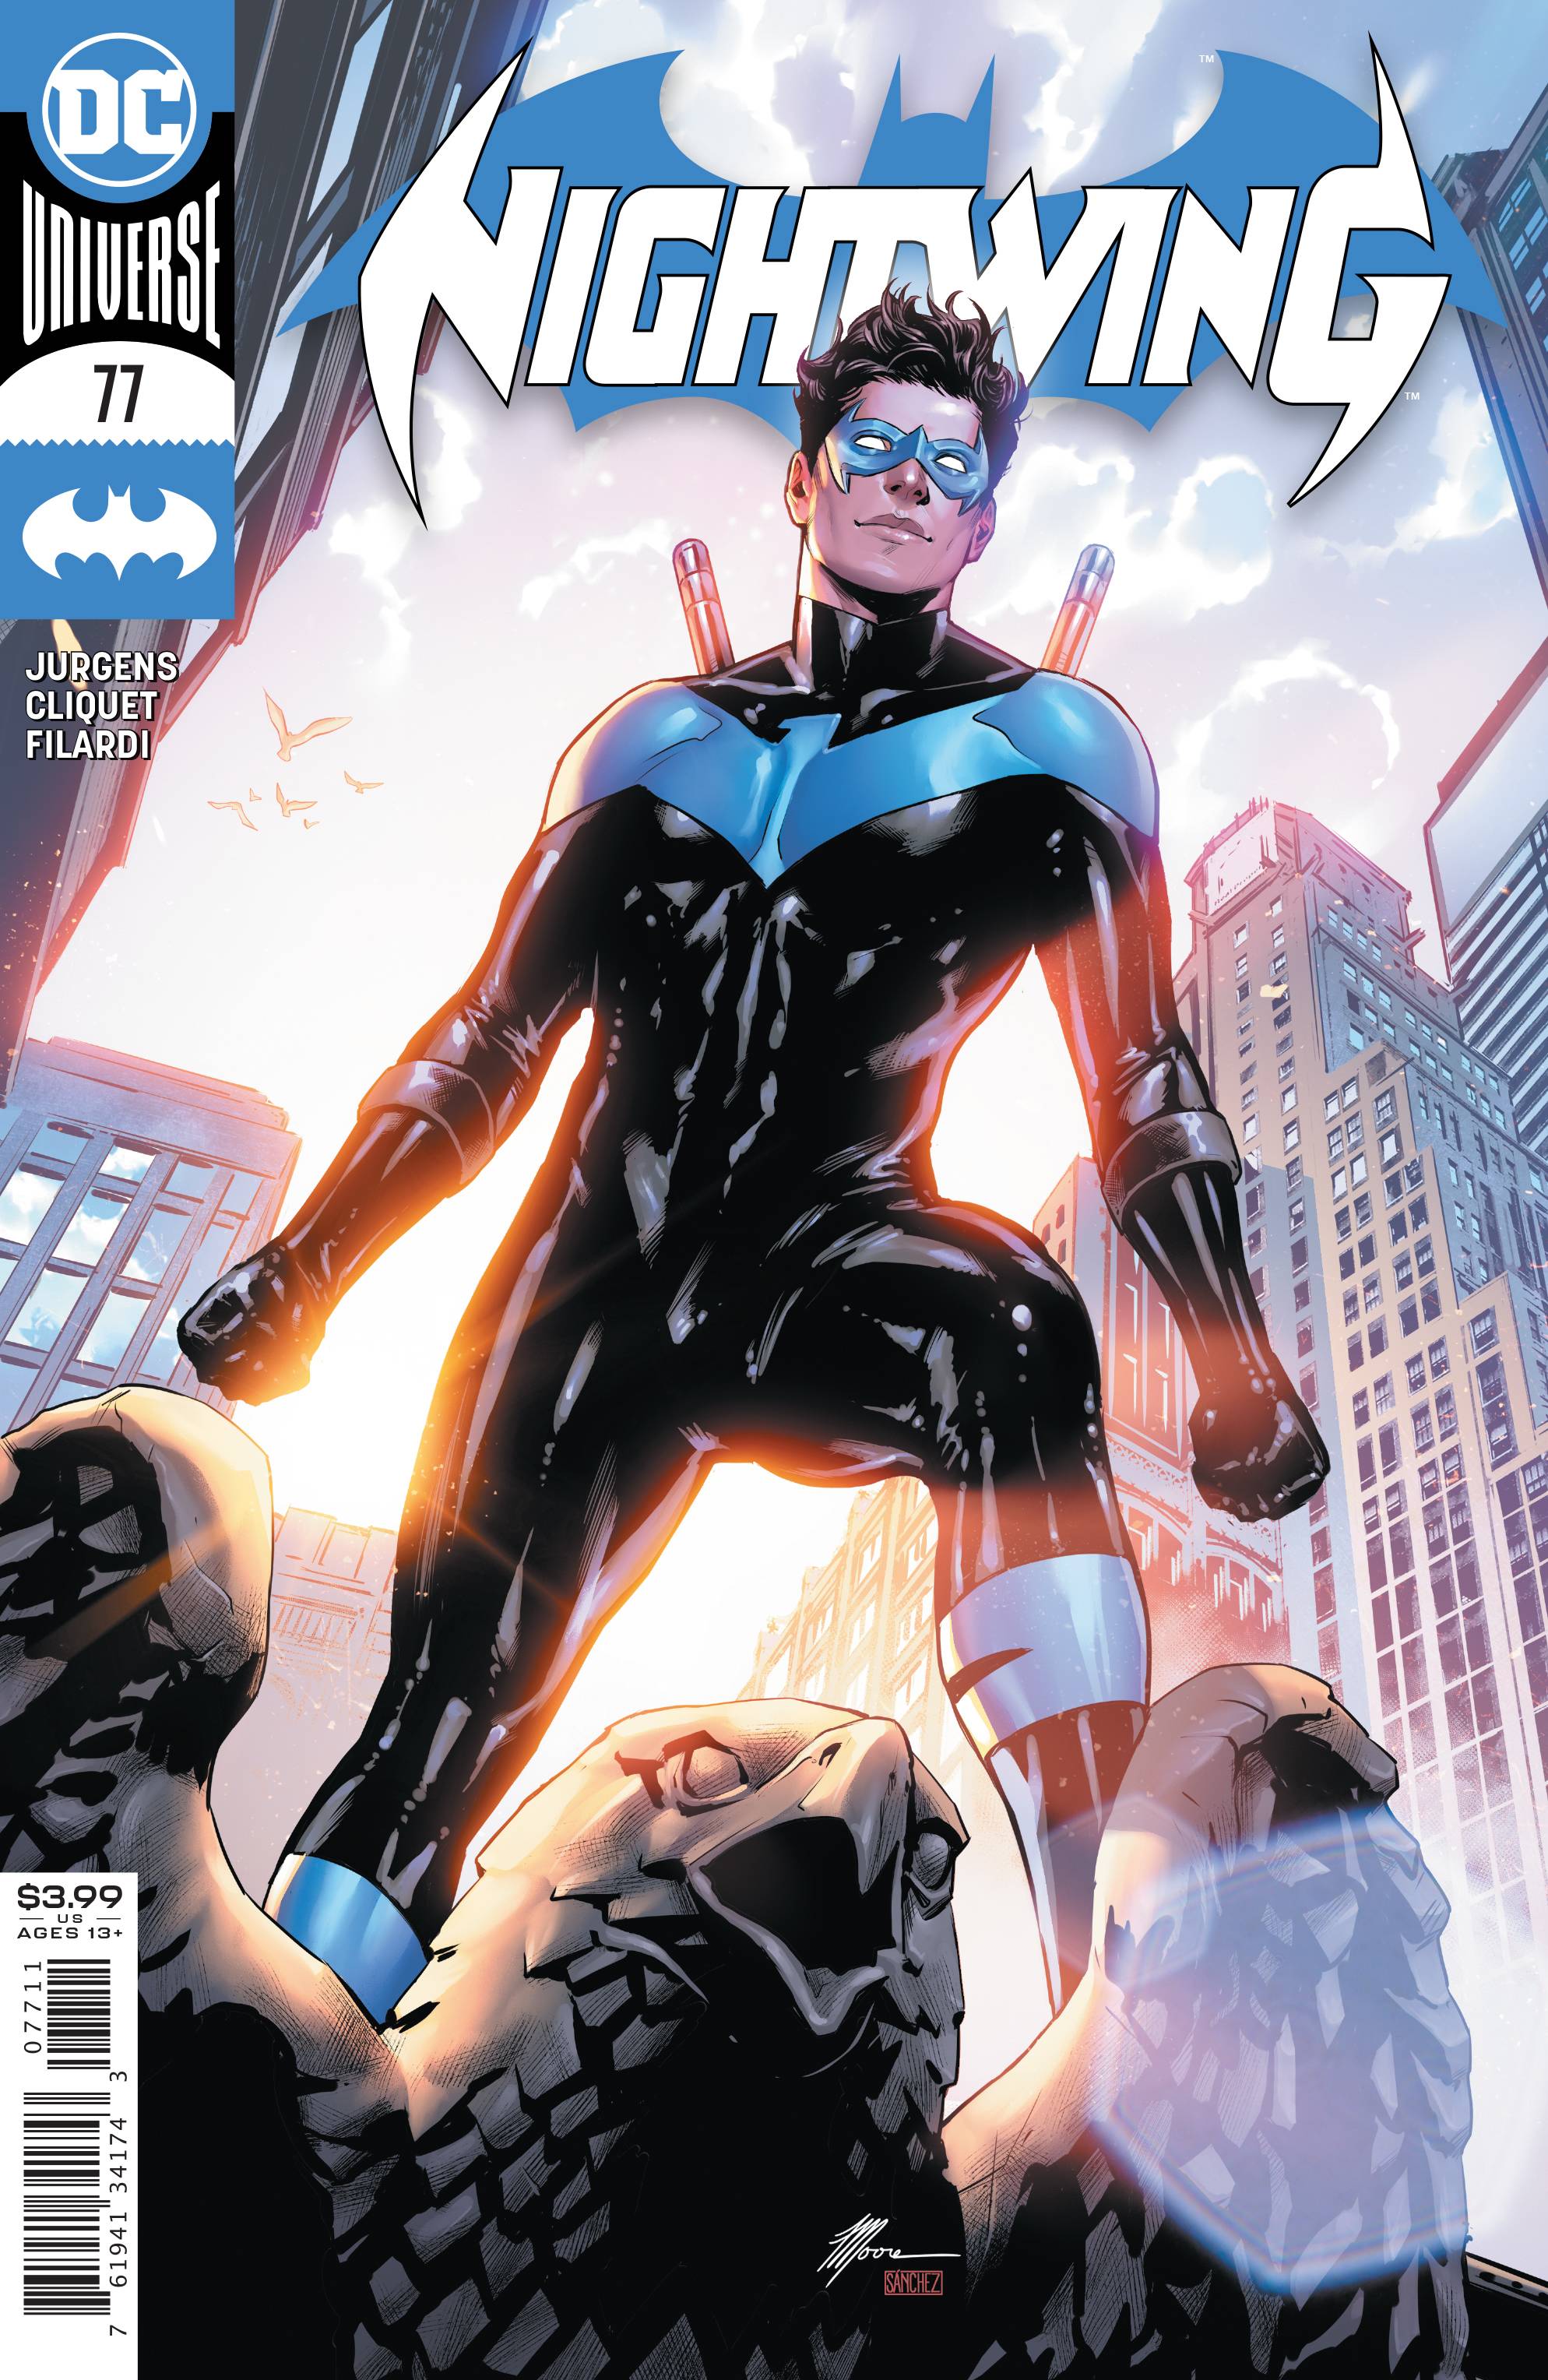 NIGHTWING #77 | Game Master's Emporium (The New GME)